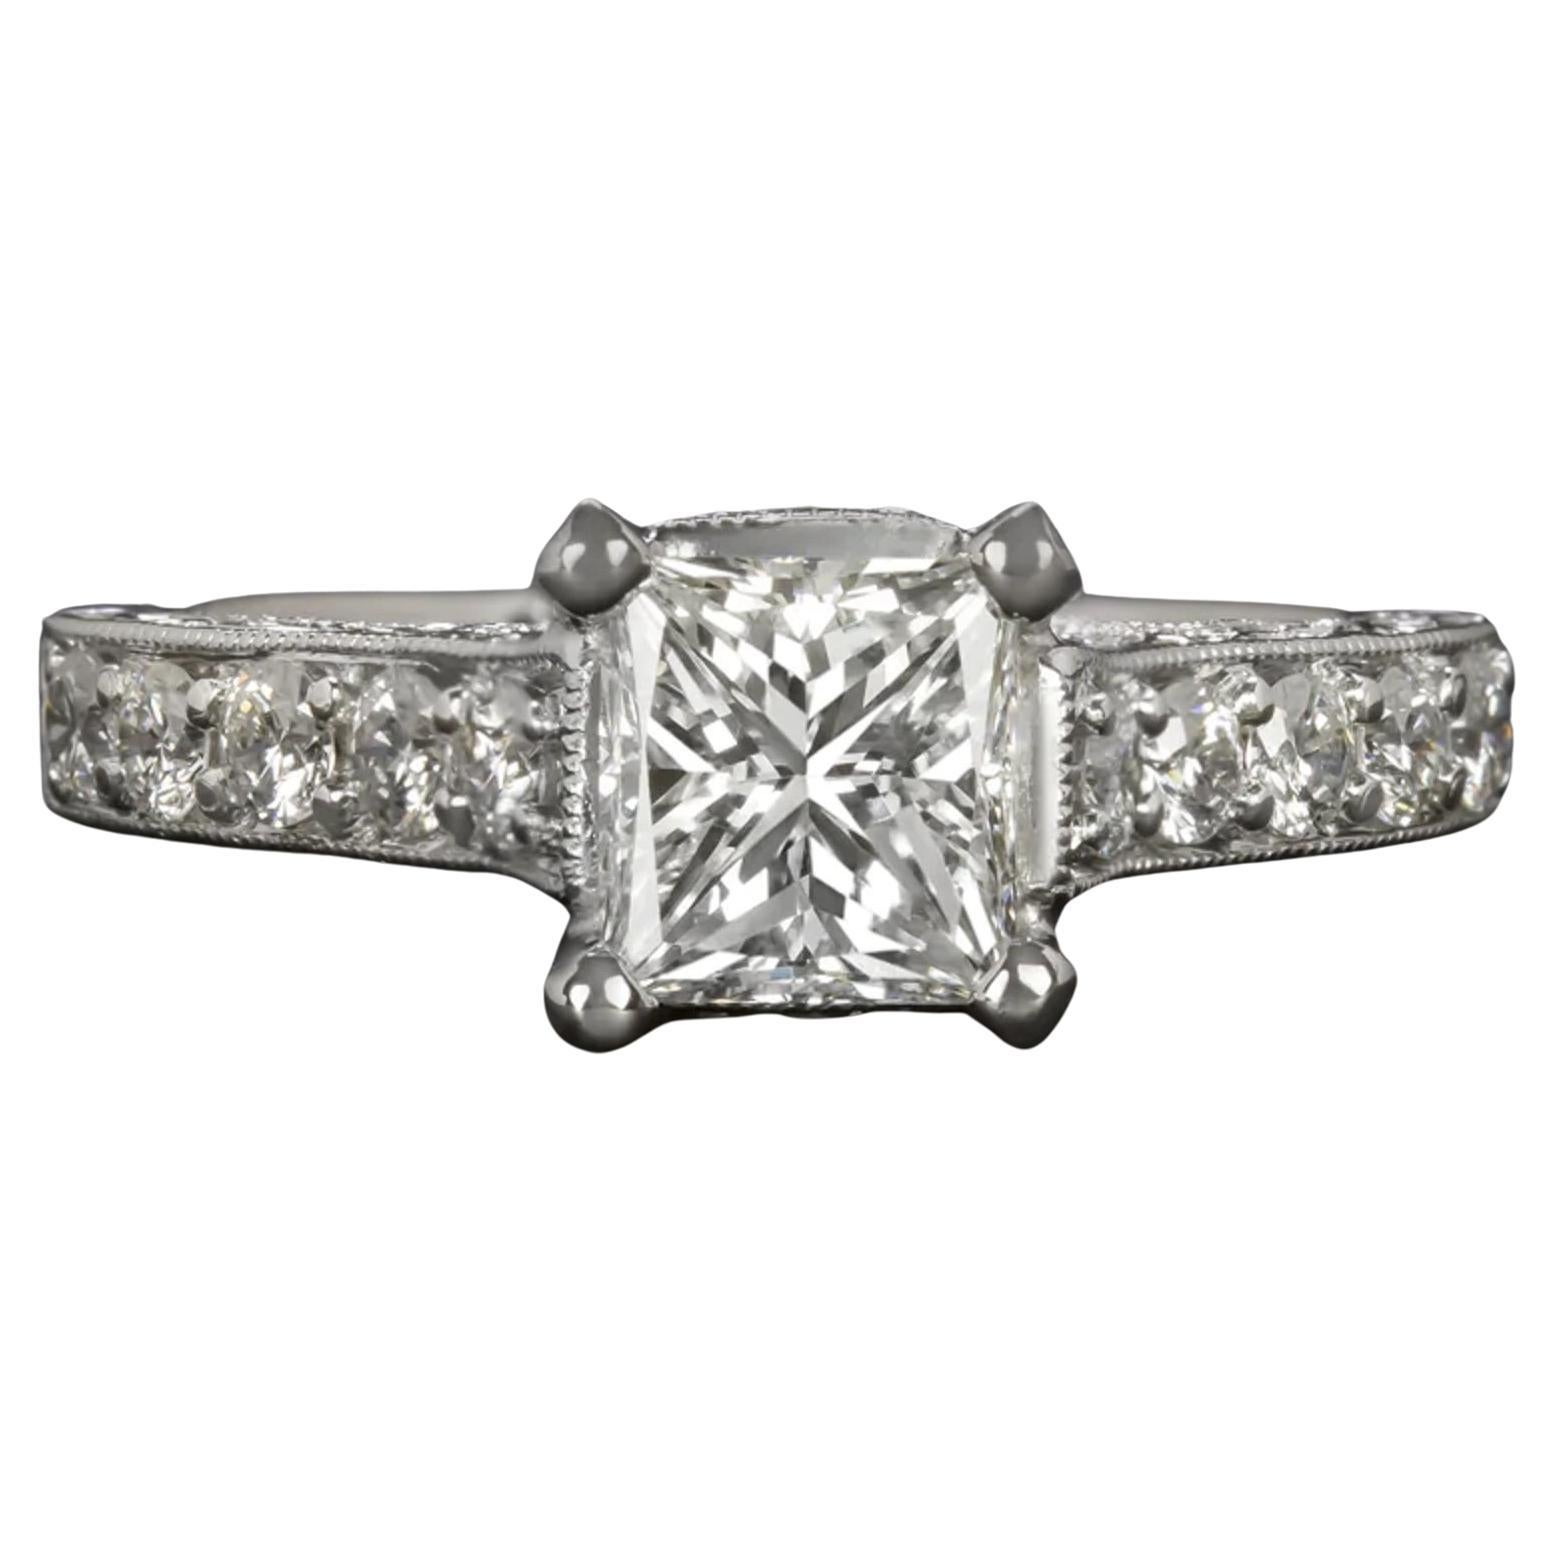 GIA Certified Radiant Cut Diamond in a Luxurious 18k White Gold Setting For Sale